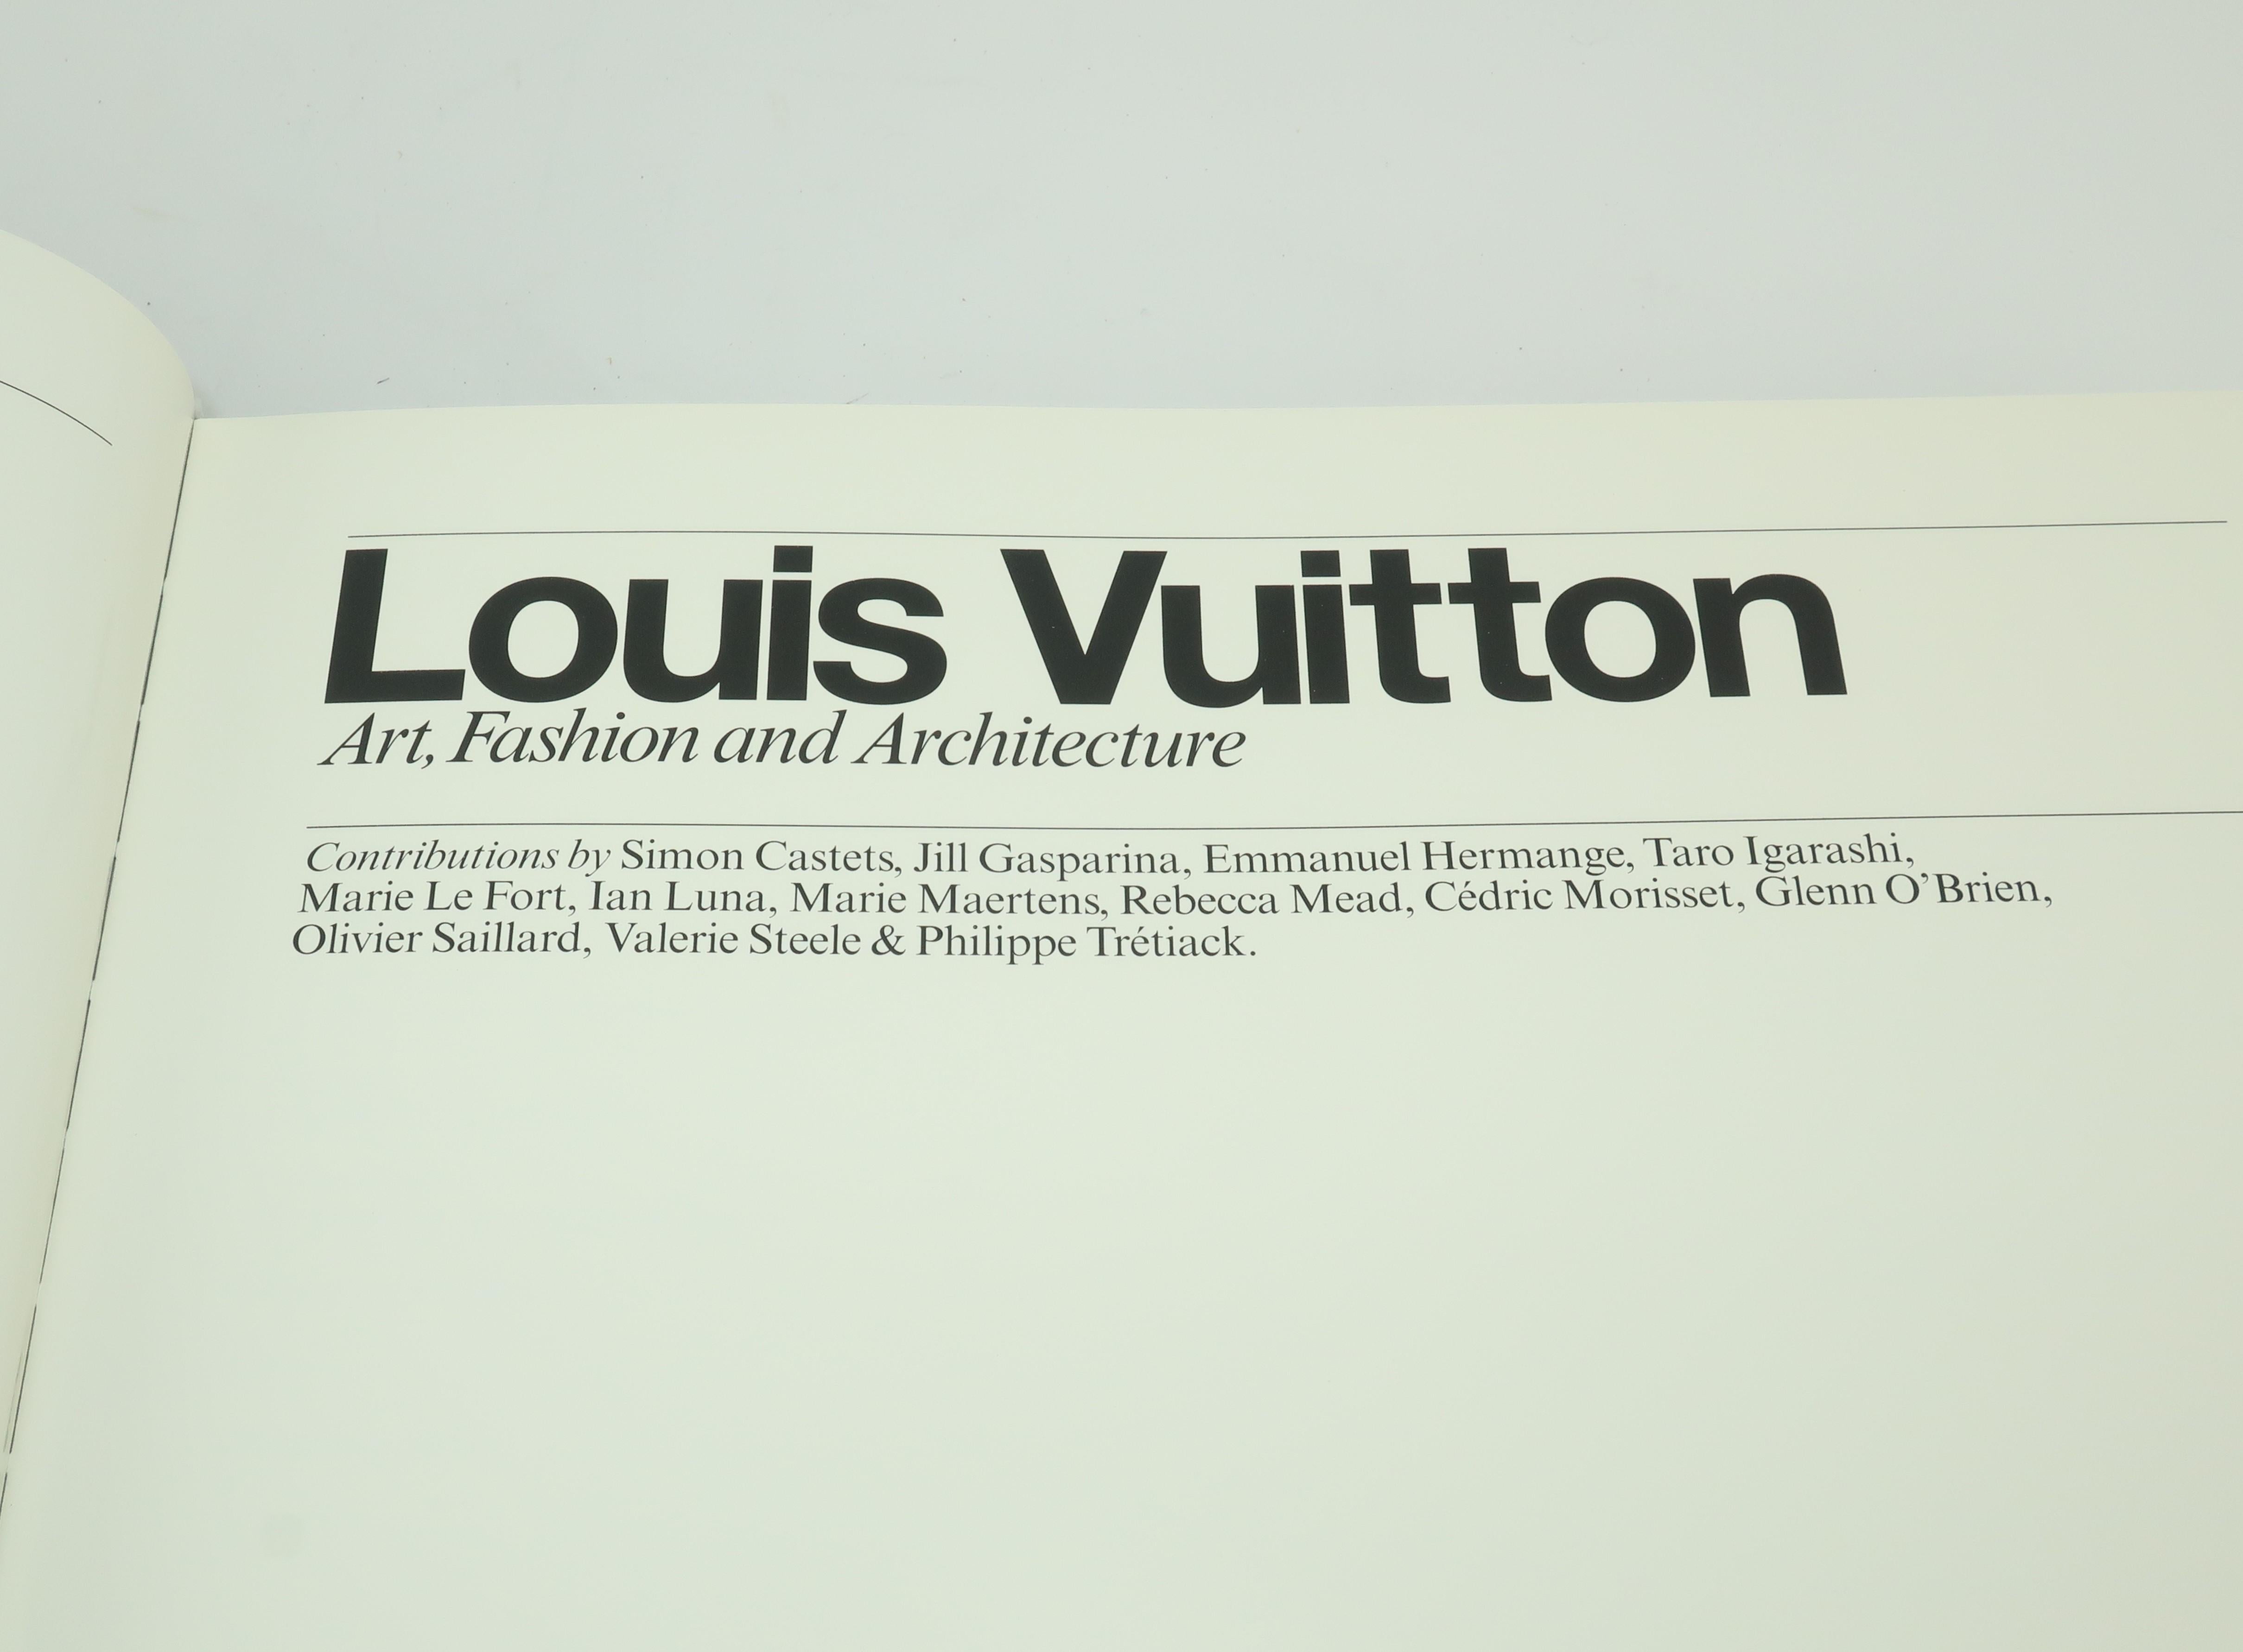 Buy Louis Vuitton: Art, Fashion and Architecture Book Online at